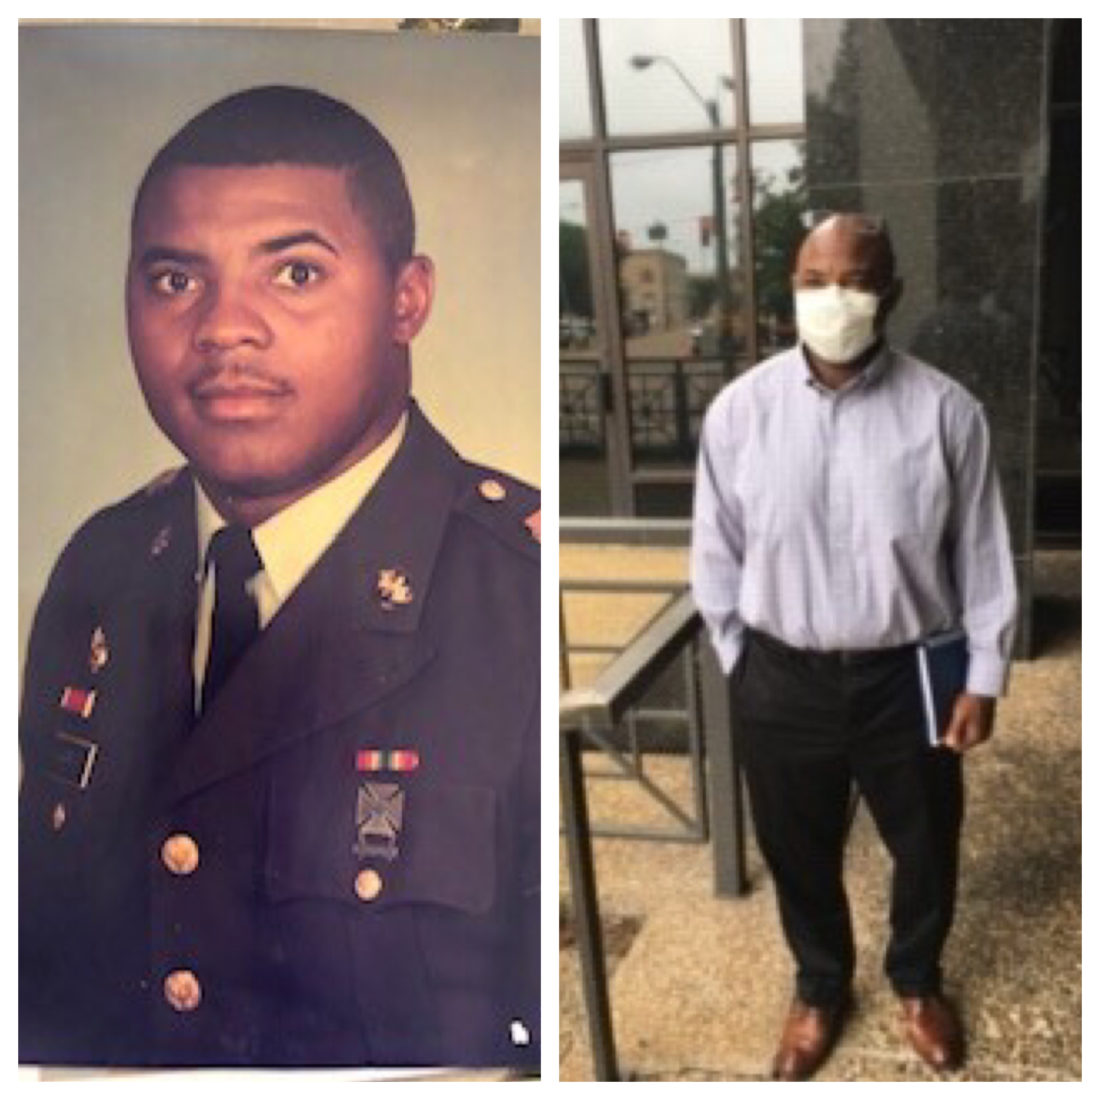 On left, man wearing U.S. Army uniform. On right, same man wearing face mask and business attire. 